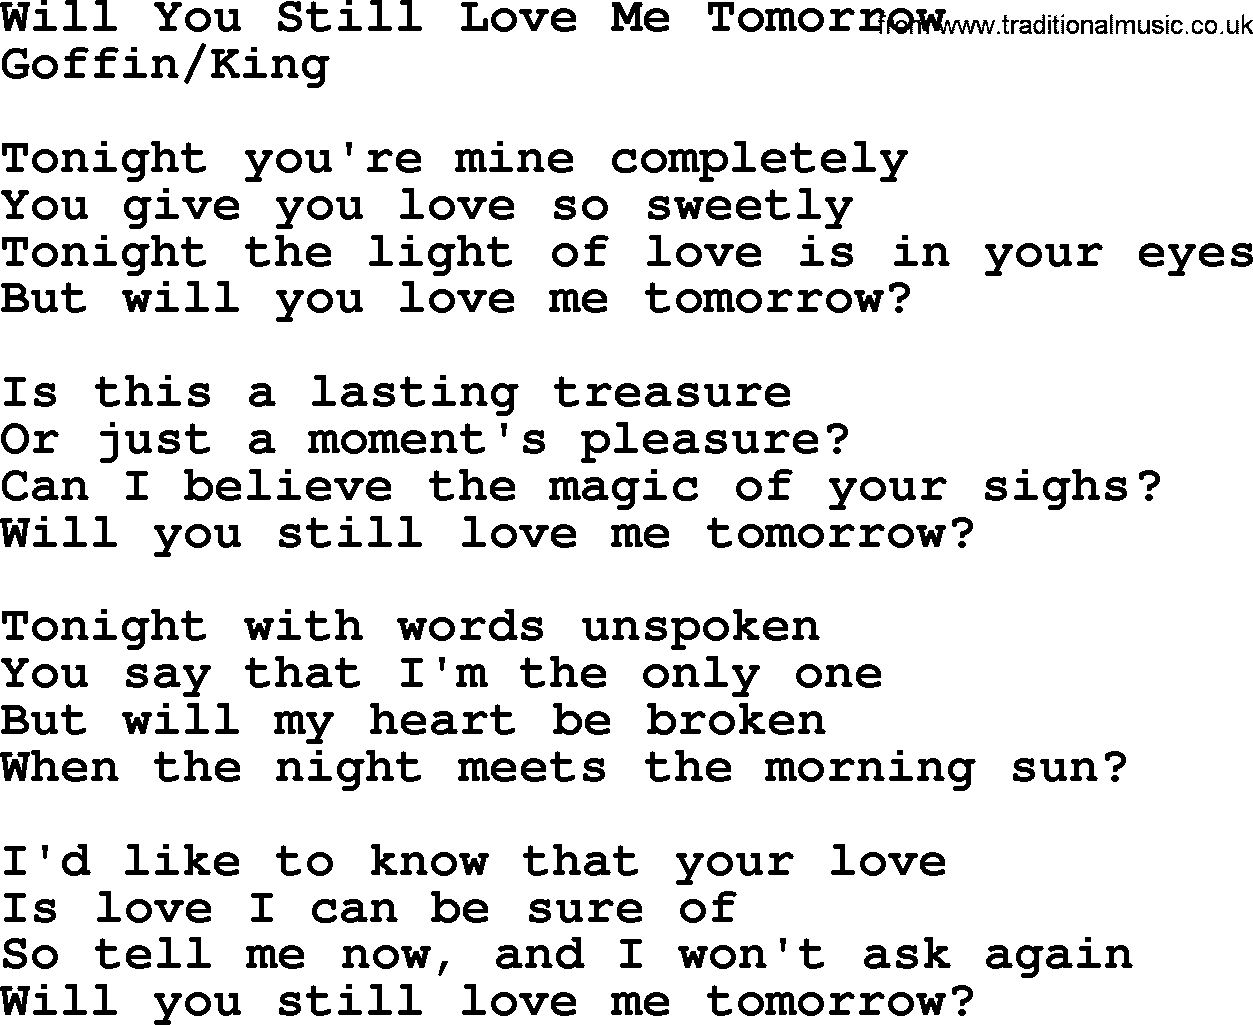 The Byrds song Will You Still Love Me Tomorrow, lyrics